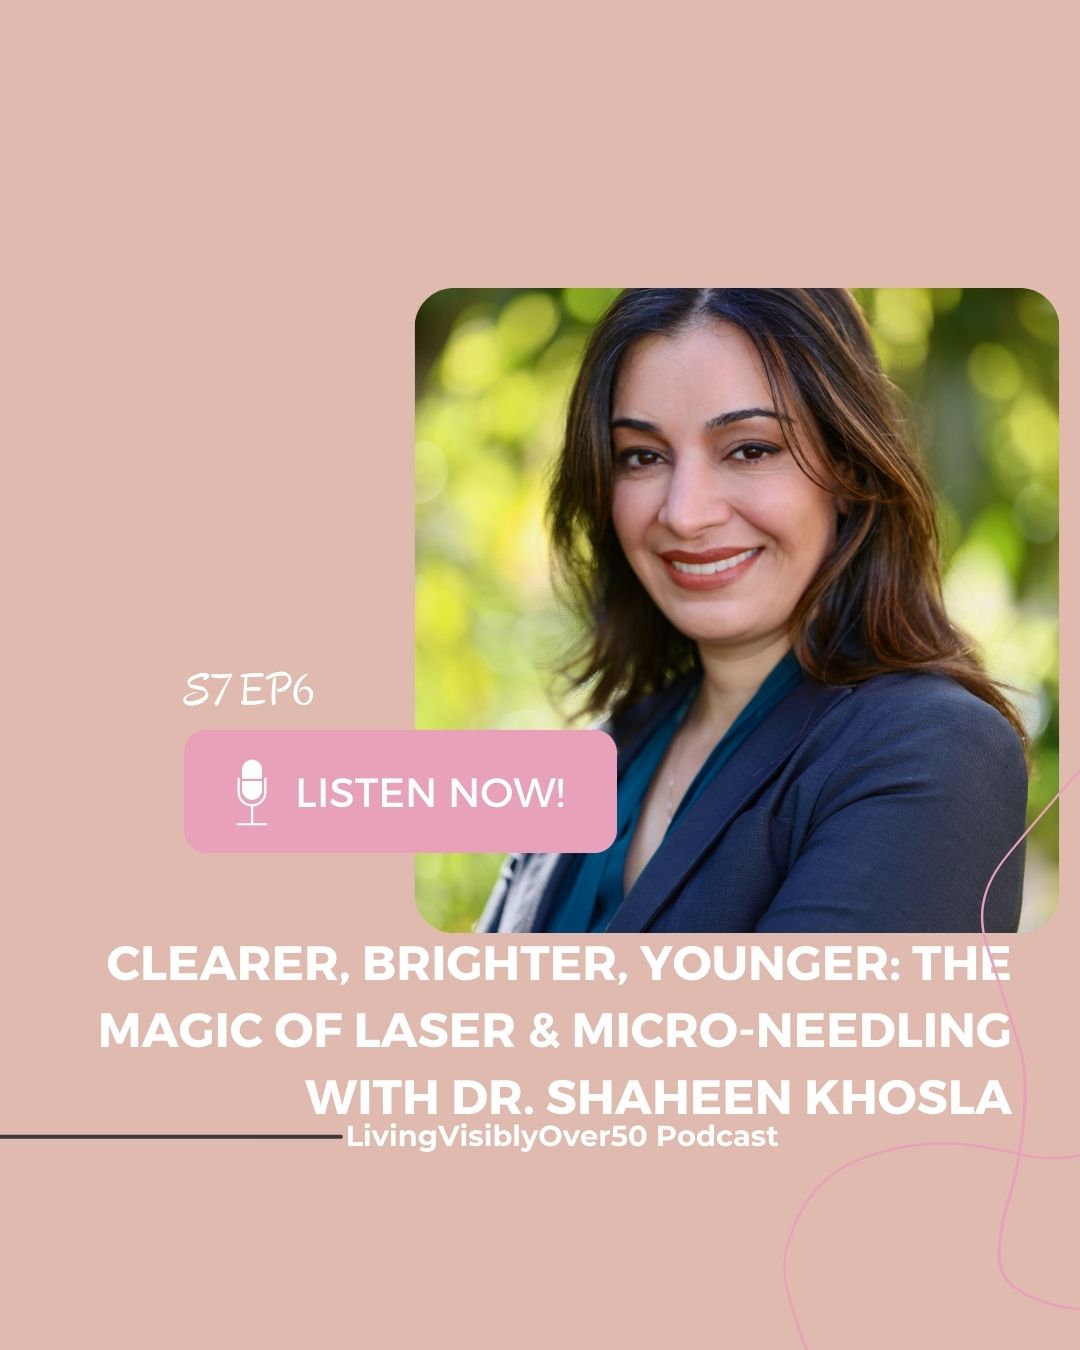 Living Visibly Over 50 podcast | Clearer, Brighter, Younger: The Magic of Laser & Micro-Needling with Dr. Shaheen Khosla.